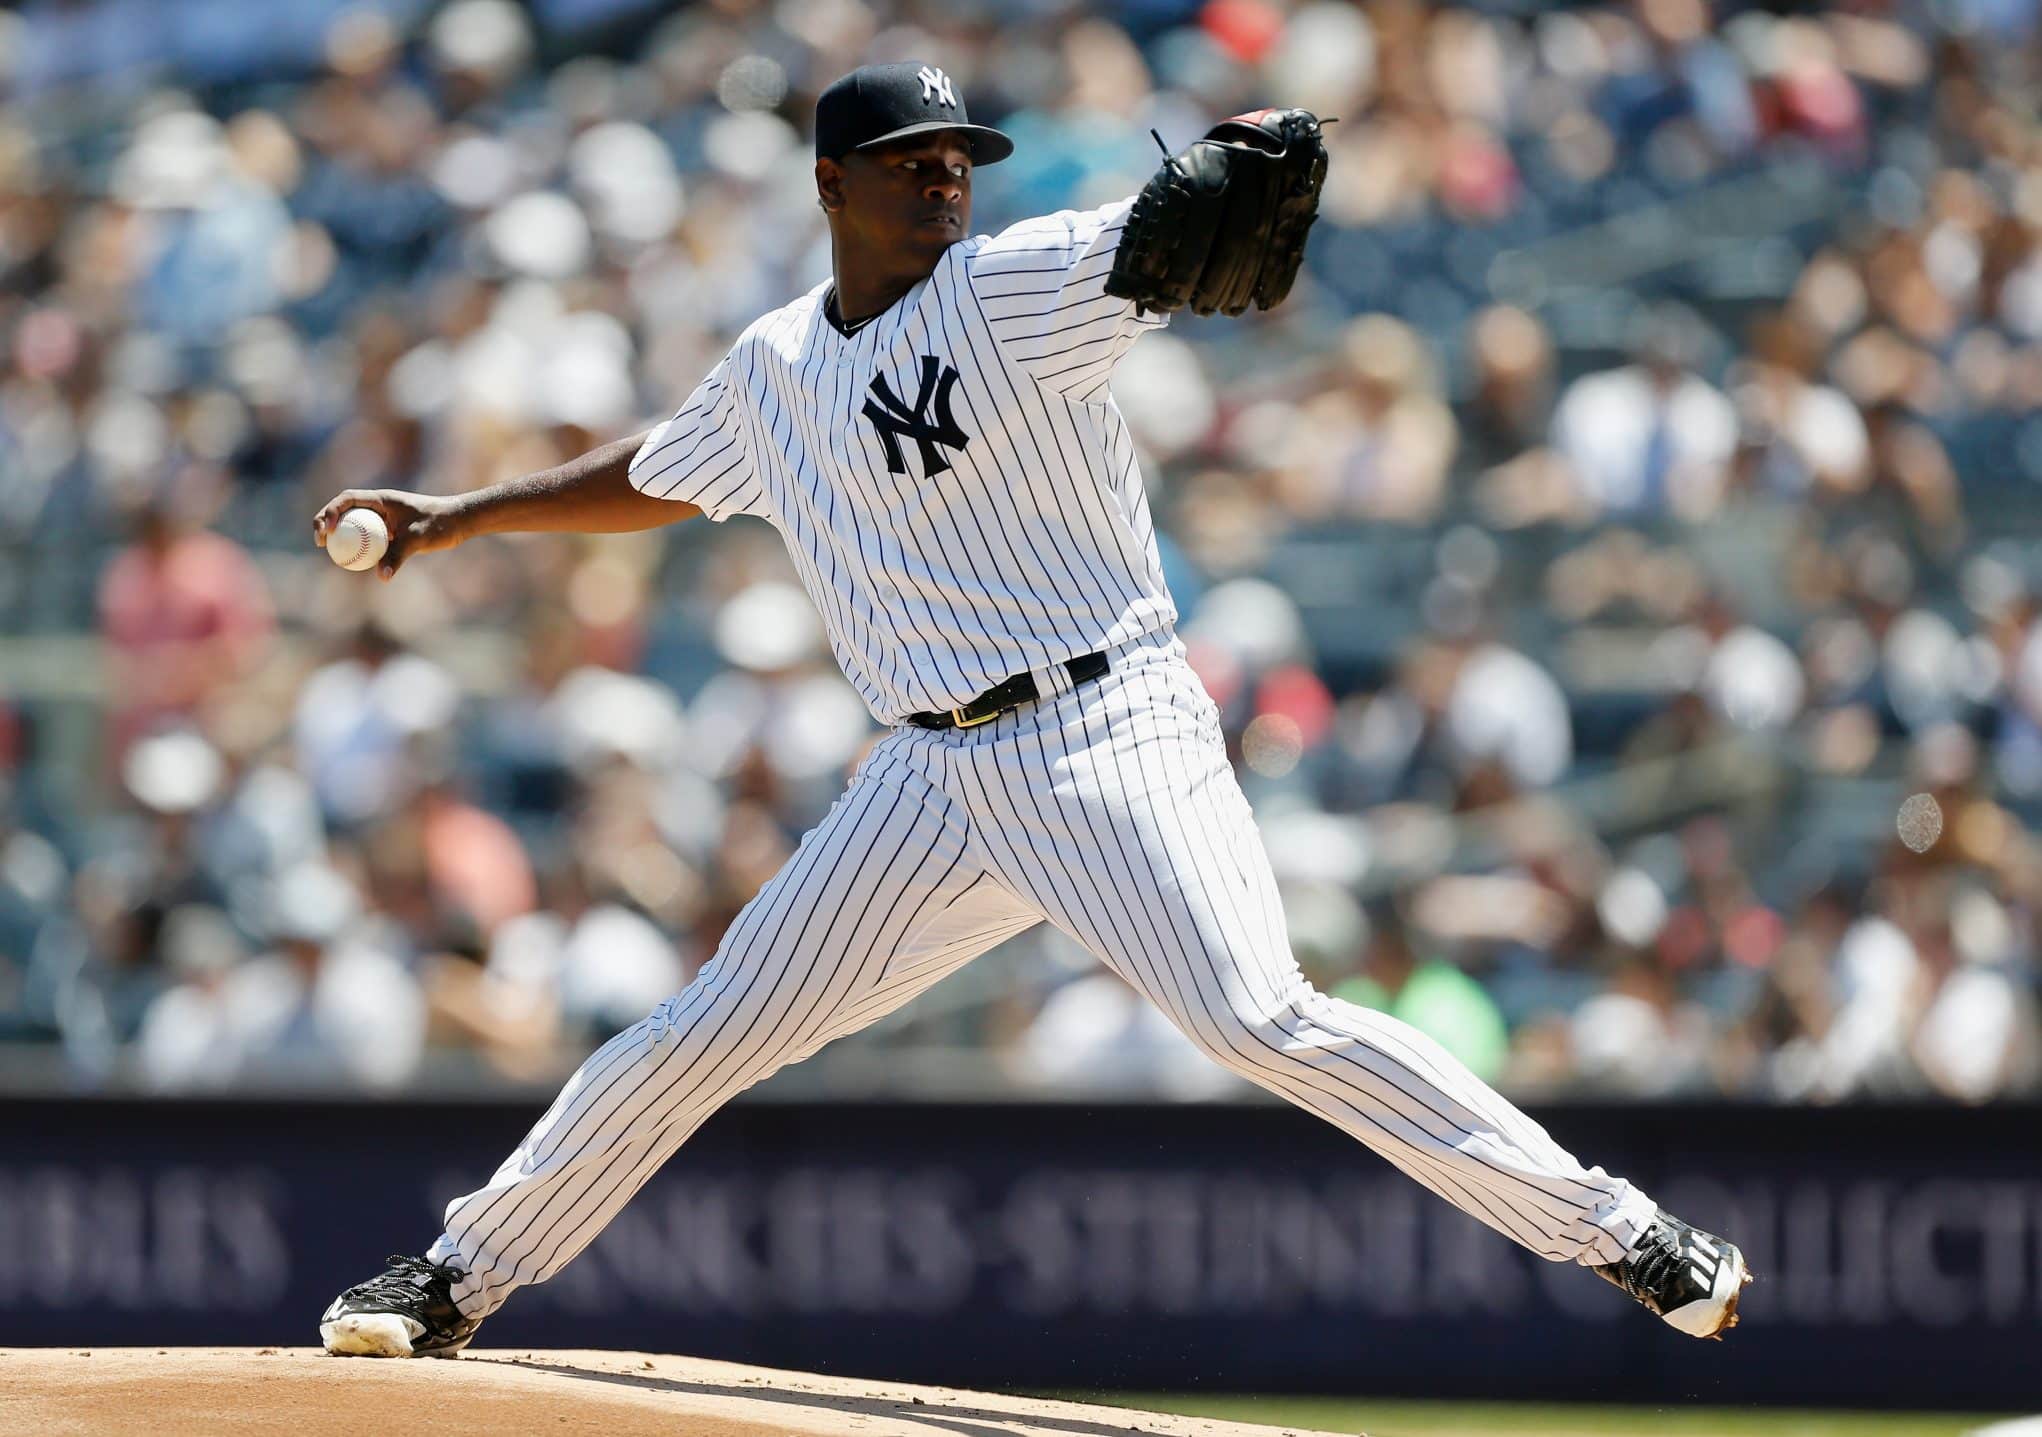 Yankees beat the Blue Jays thanks to solid start from Luis Severino